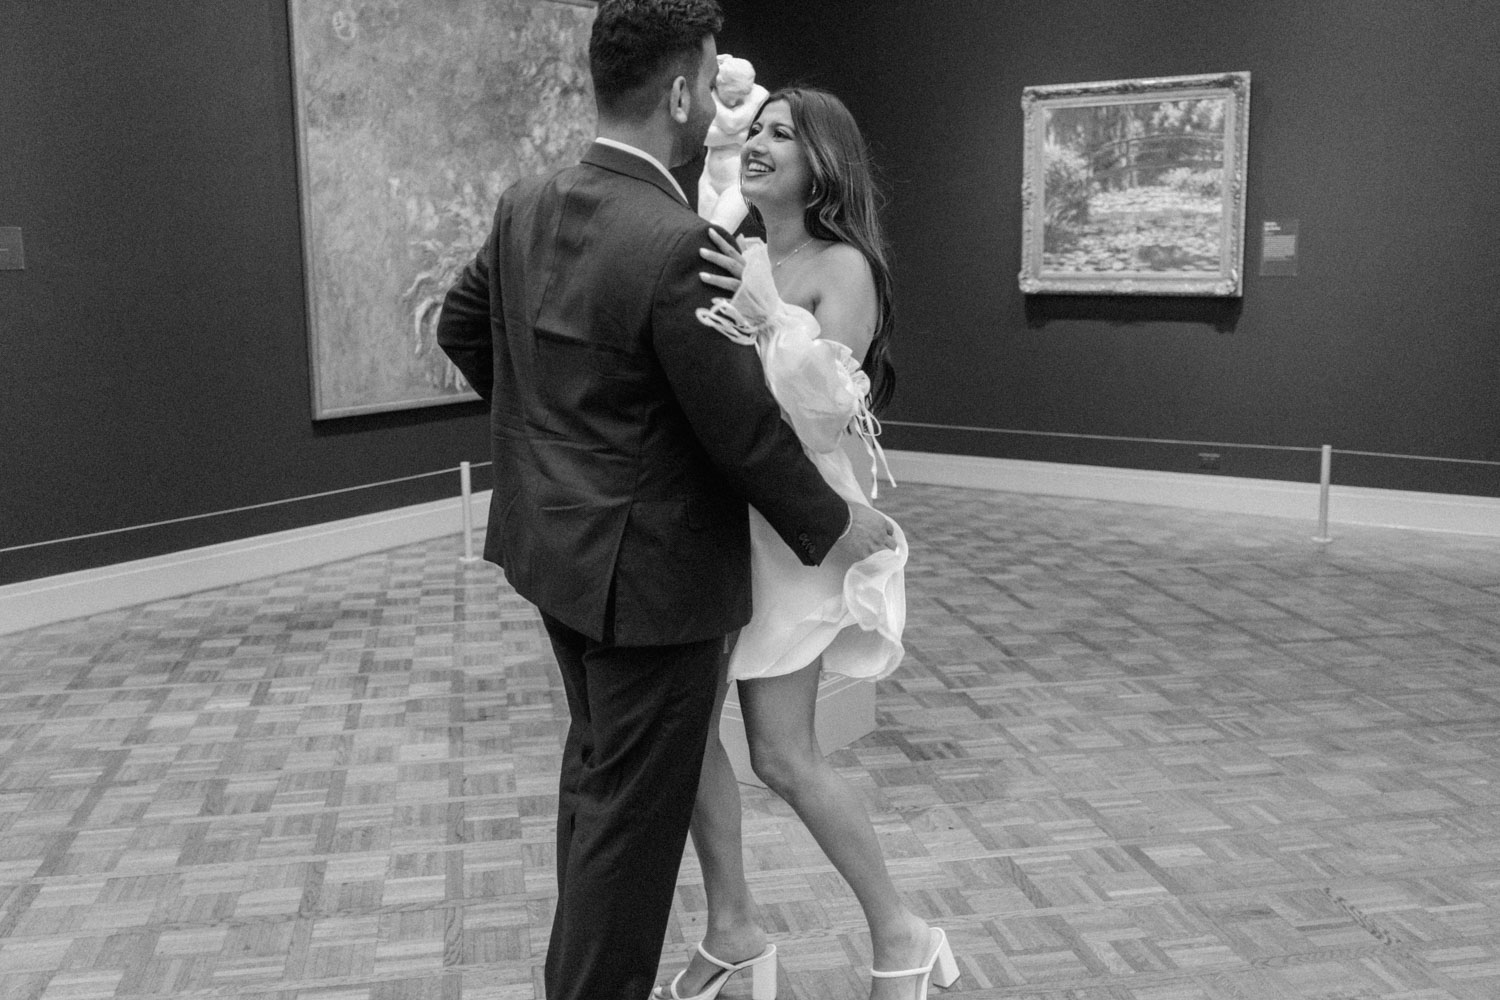 A black and white engagement photo at the Art Institute.